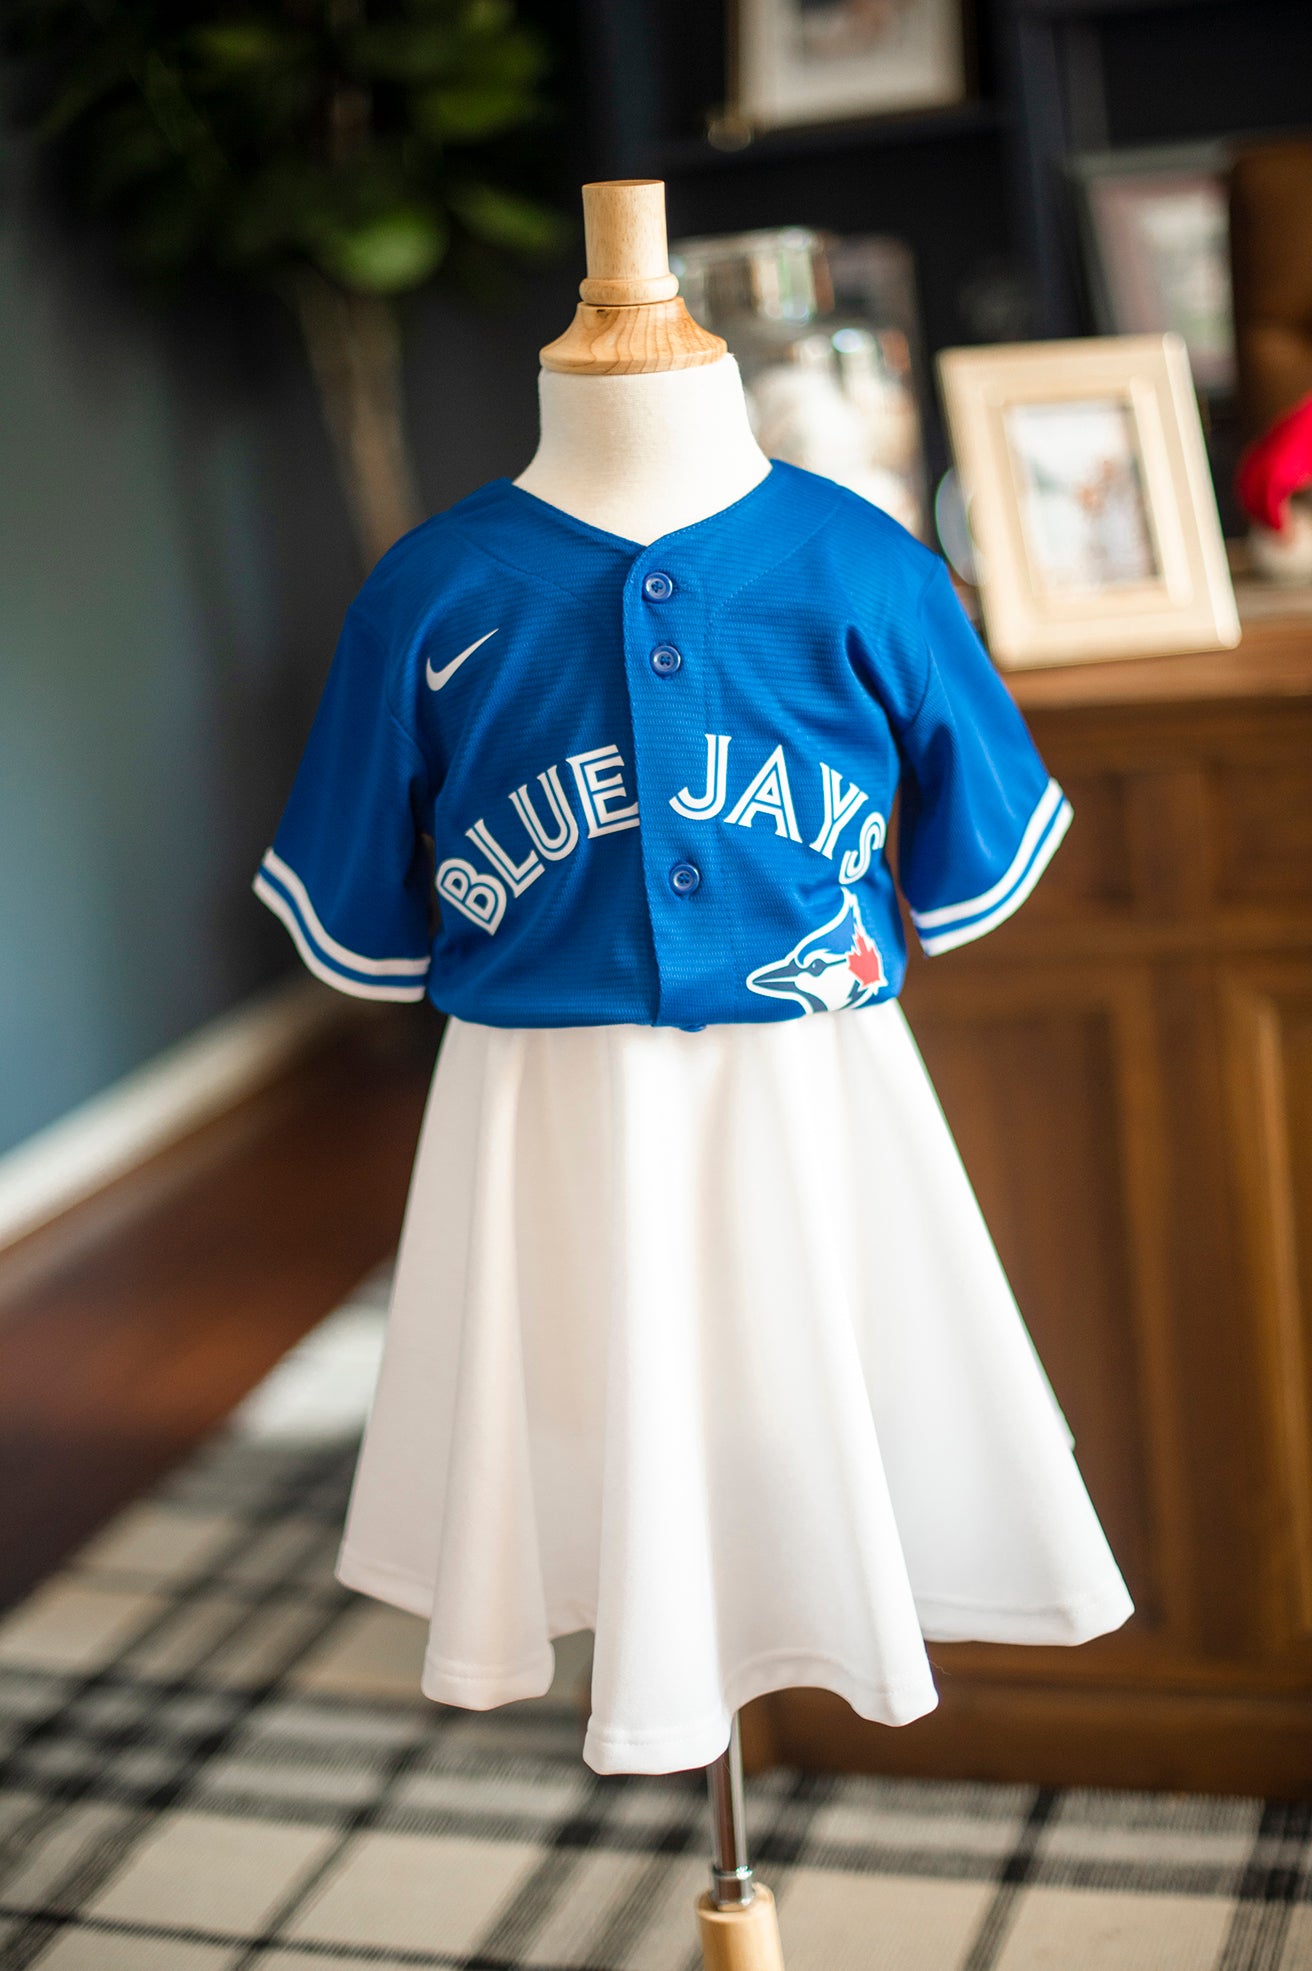 blue jays jersey outfit